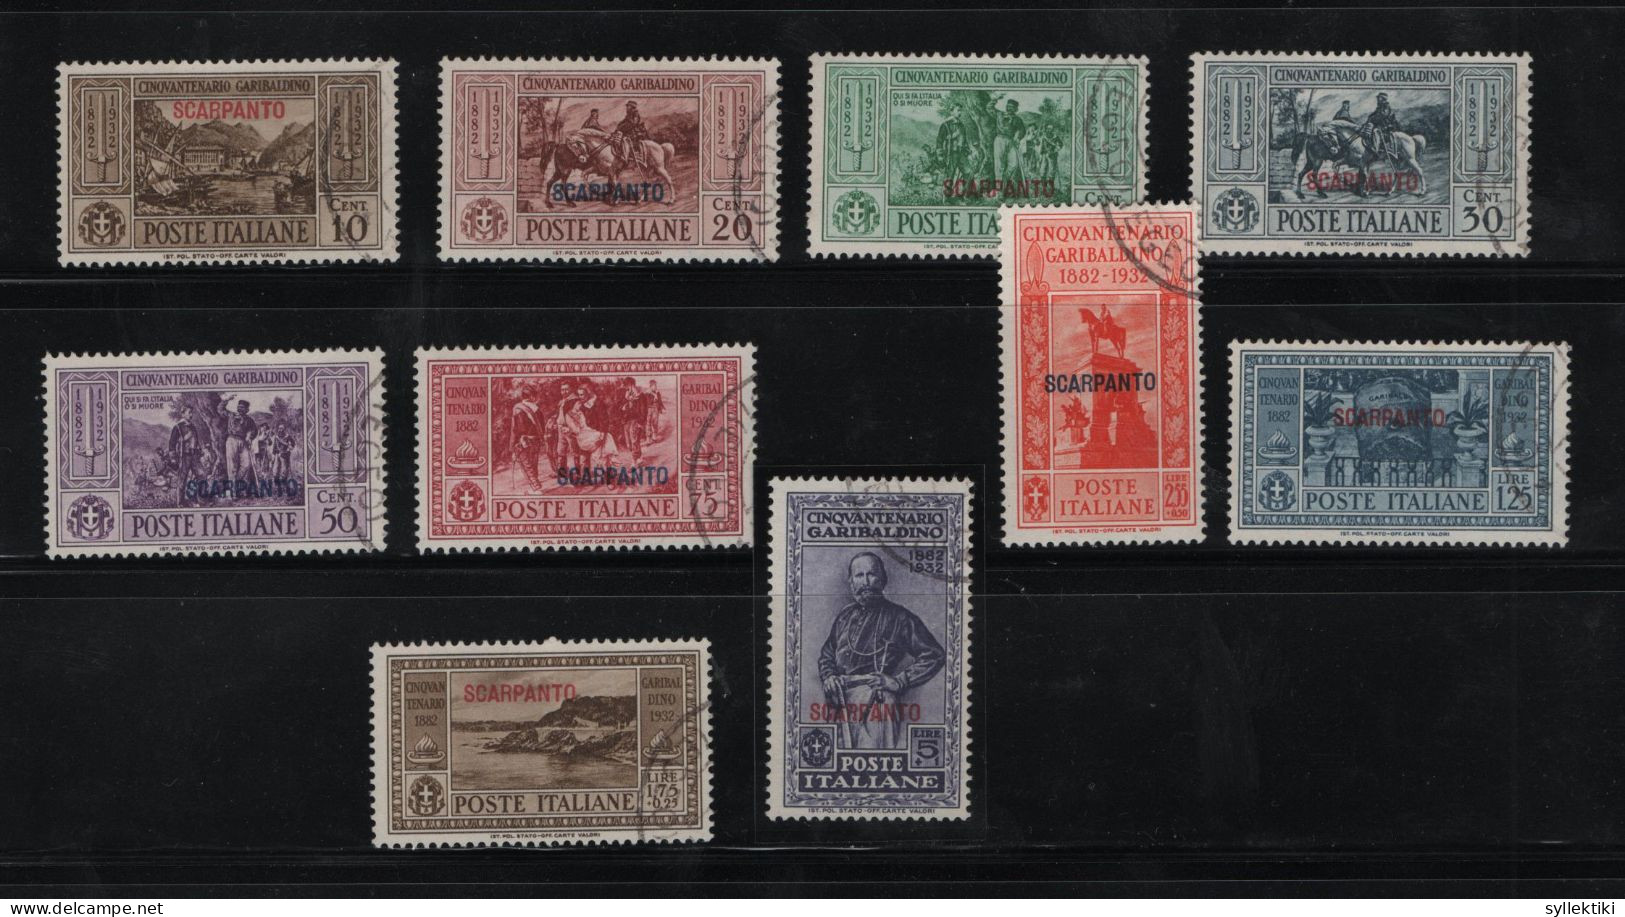 GREECE 1932 DODECANESE GARIBALDI ISSUE SCARPANTO OVERPRINT COMPLETE SET USED STAMPS   HELLAS No 108IV - 117IV AND VALUE - Dodekanisos